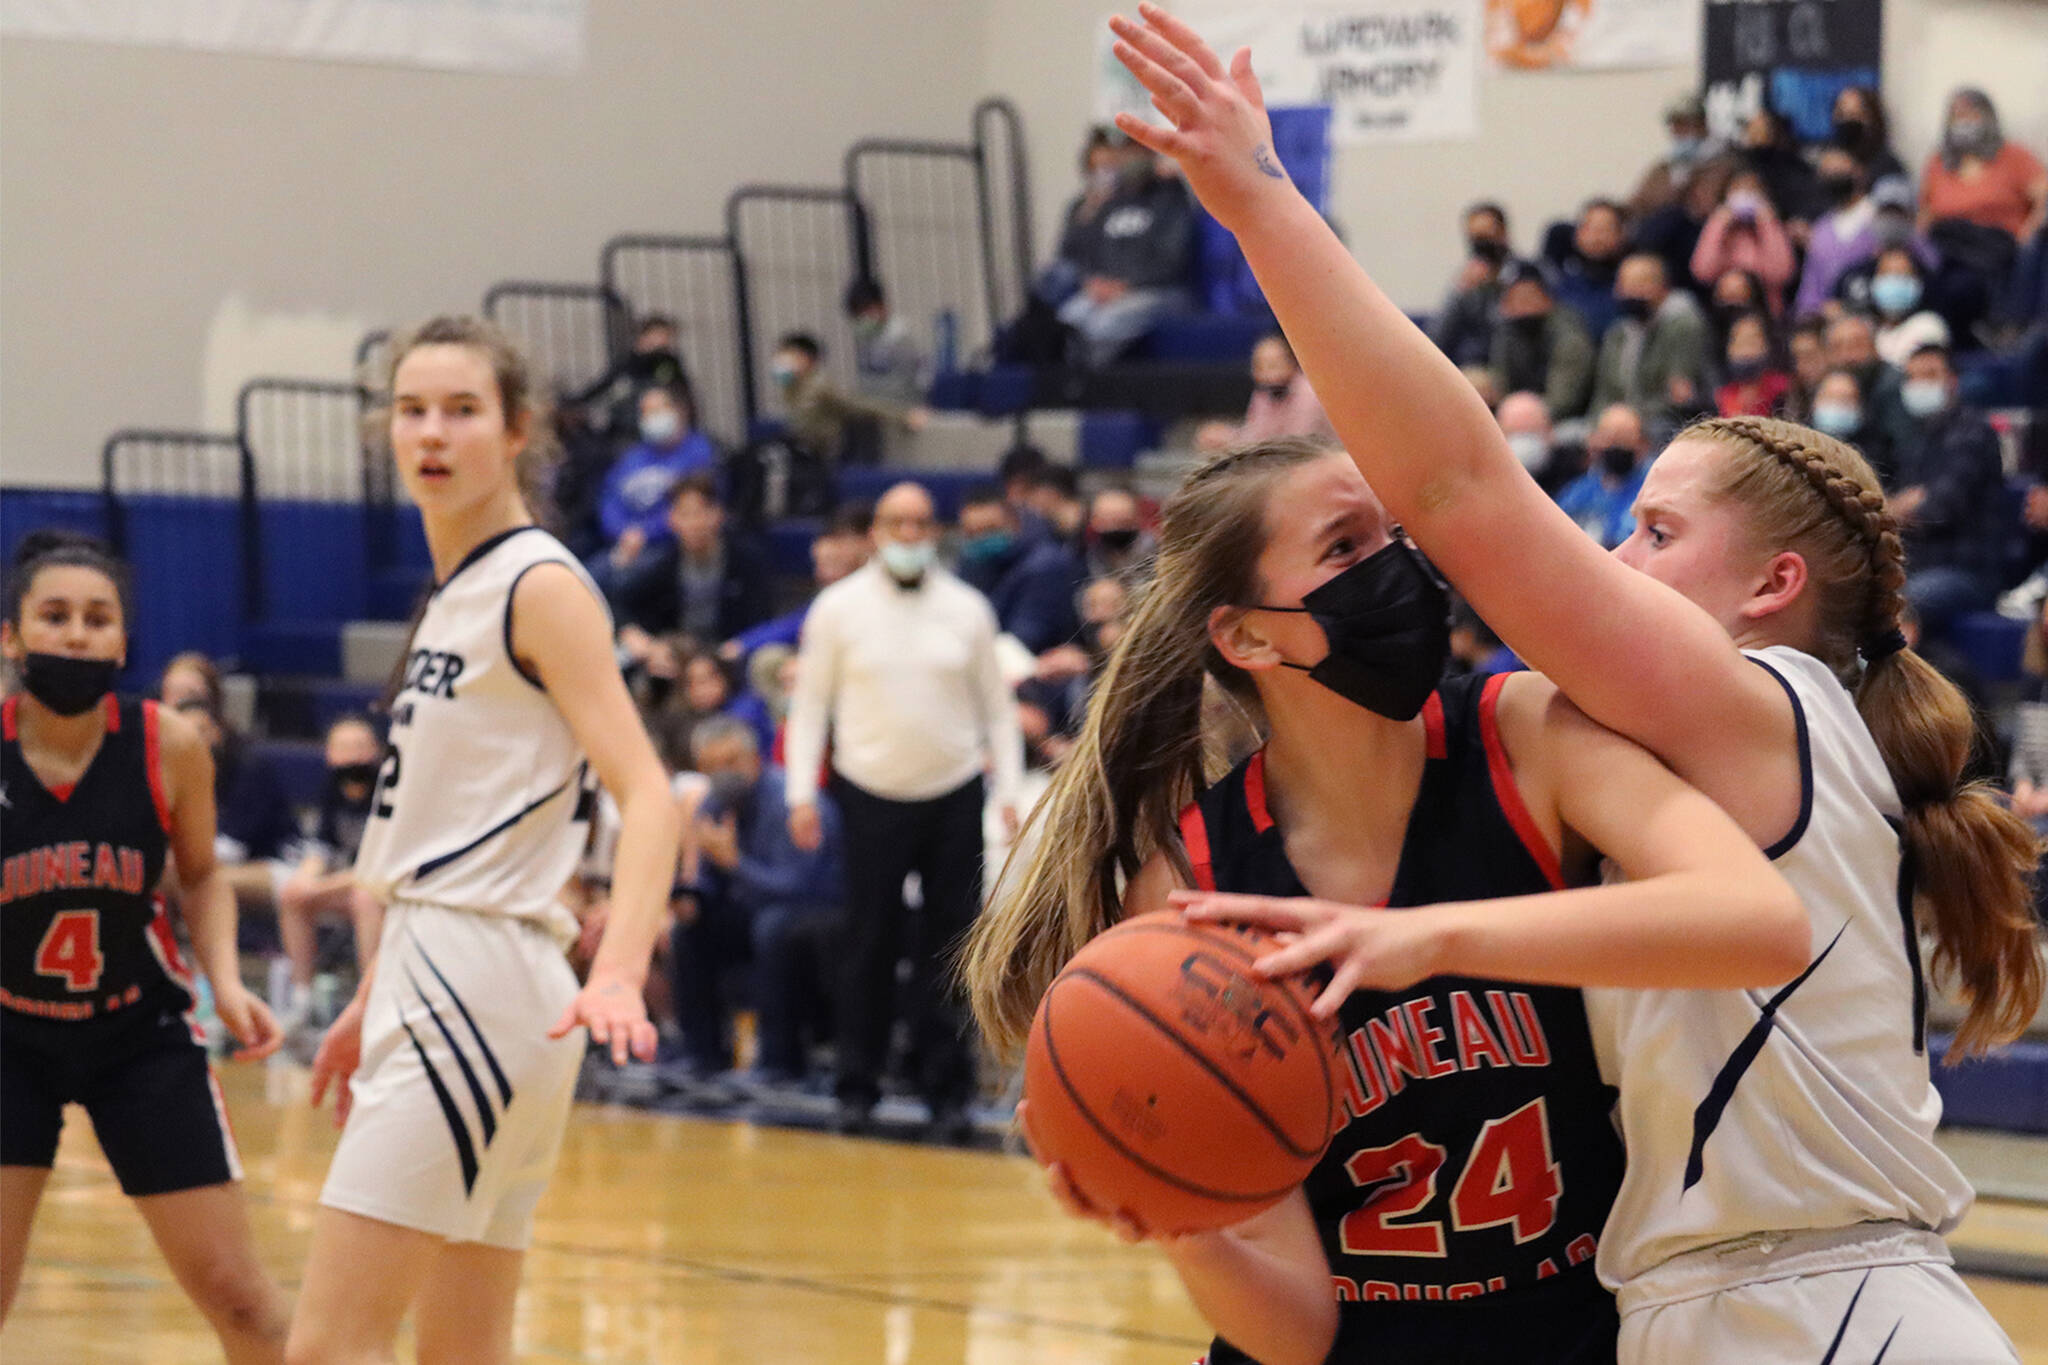 JDHS’ Mila Hargrave pivots toward the hoop for a tough inside shot while tightly defended by TMHS’ Sydney Strong. In the background JDHS’ Kiyara Miller and TMHS’ Kerra Baxter look on. (Ben Hohenstatt / Juneau Empire)